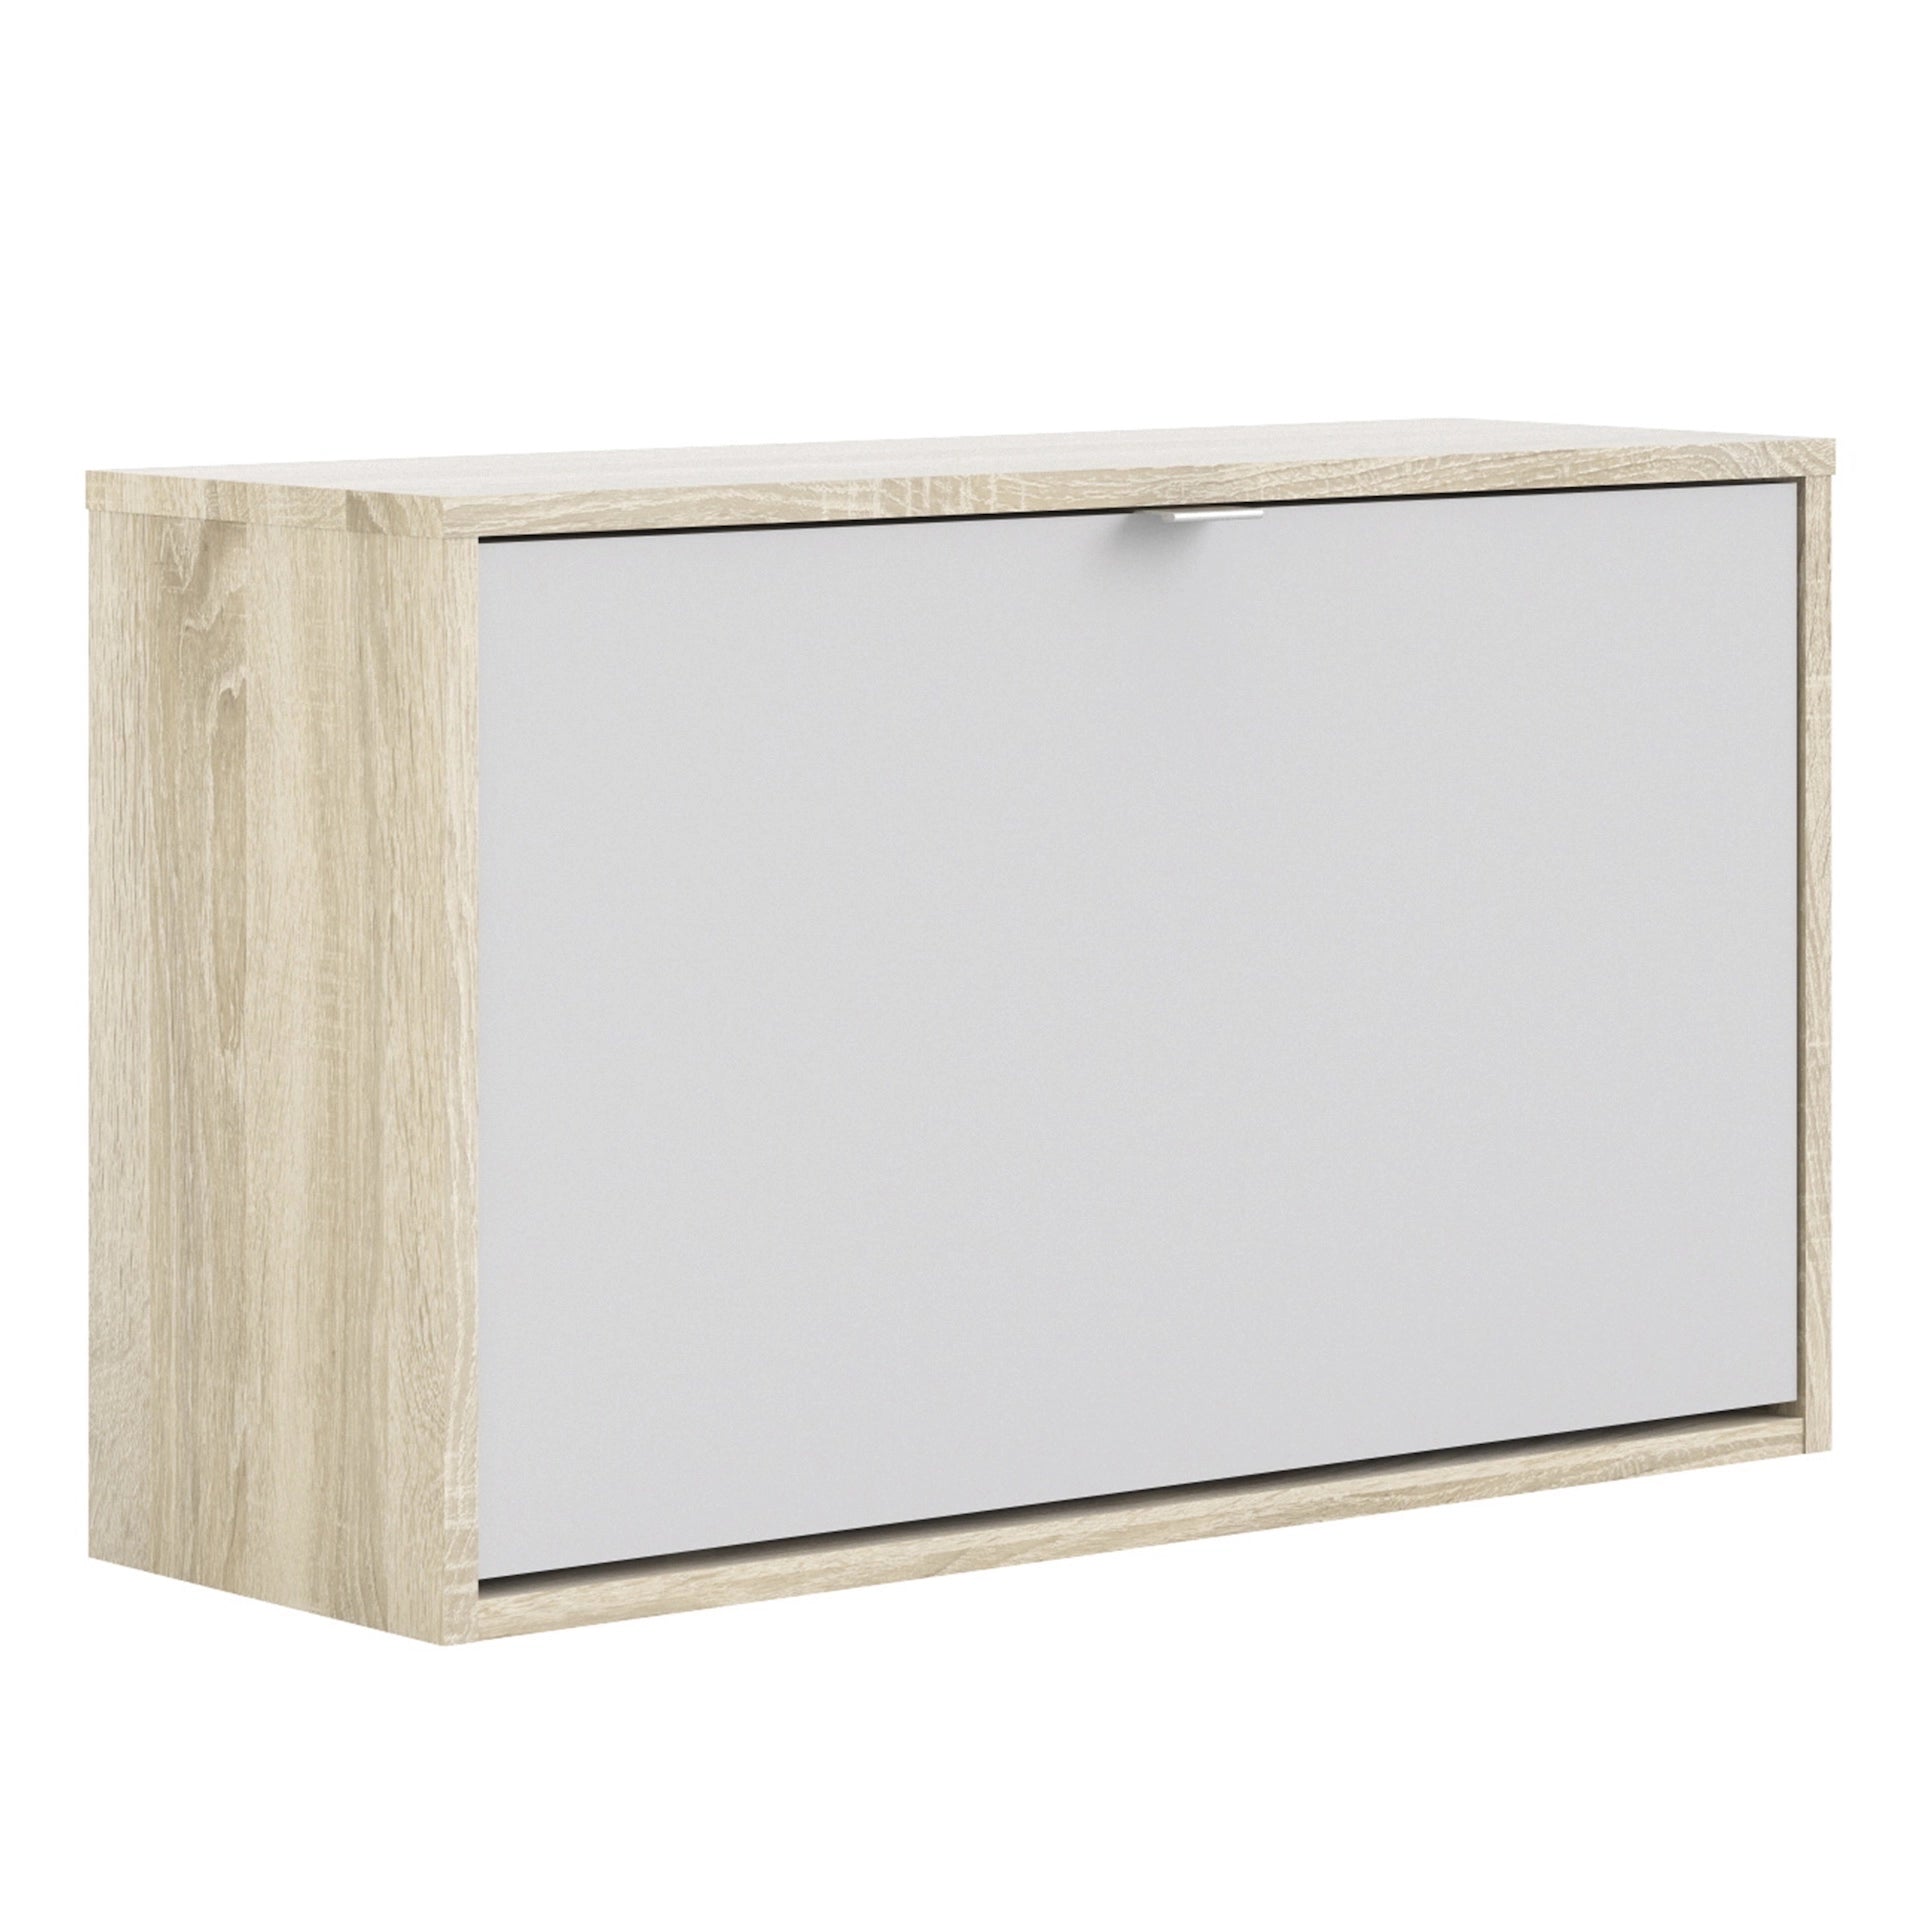 Furniture To Go Shoes Shoe Cabinet W. 1 Tilting Door & 2 Layers Oak Structure White